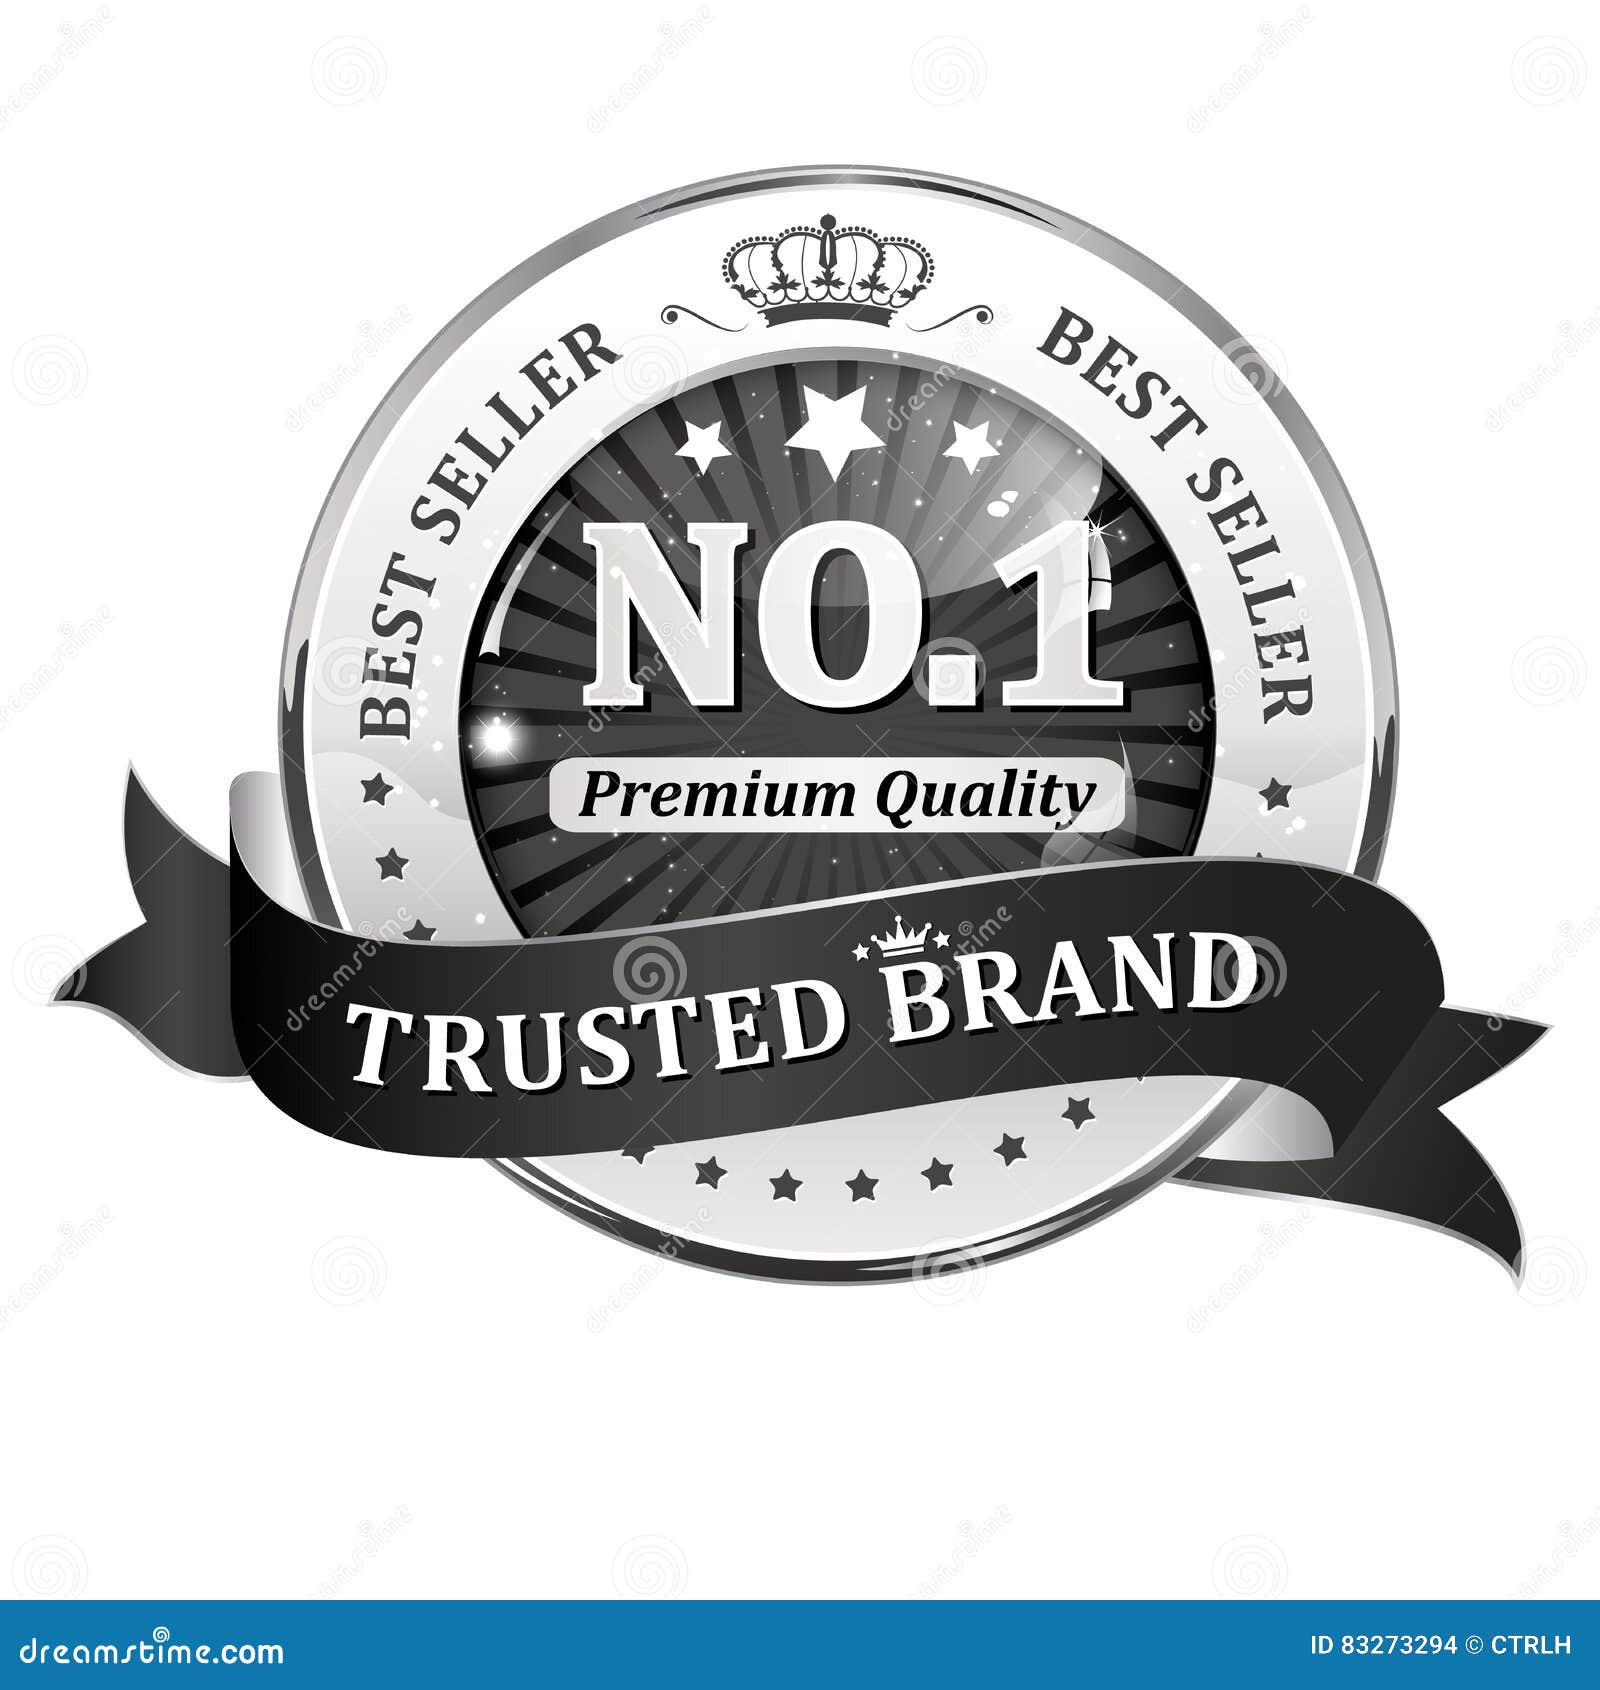 https://thumbs.dreamstime.com/z/trusted-brand-best-seller-premium-quality-shiny-icon-label-badge-83273294.jpg